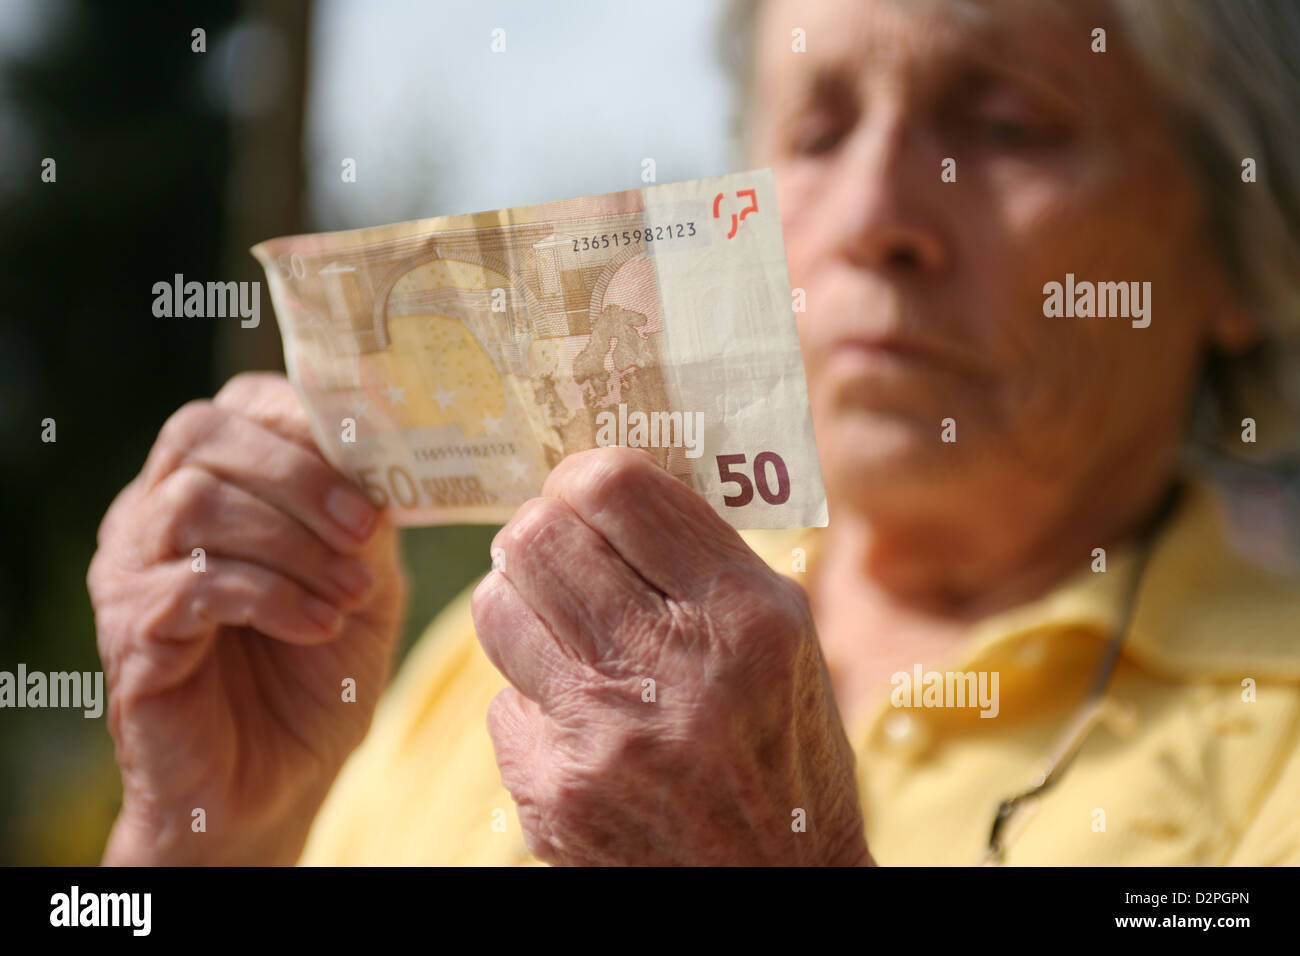 Berlin, Germany, the hands of a pensioner with a Euro bill Stock Photo